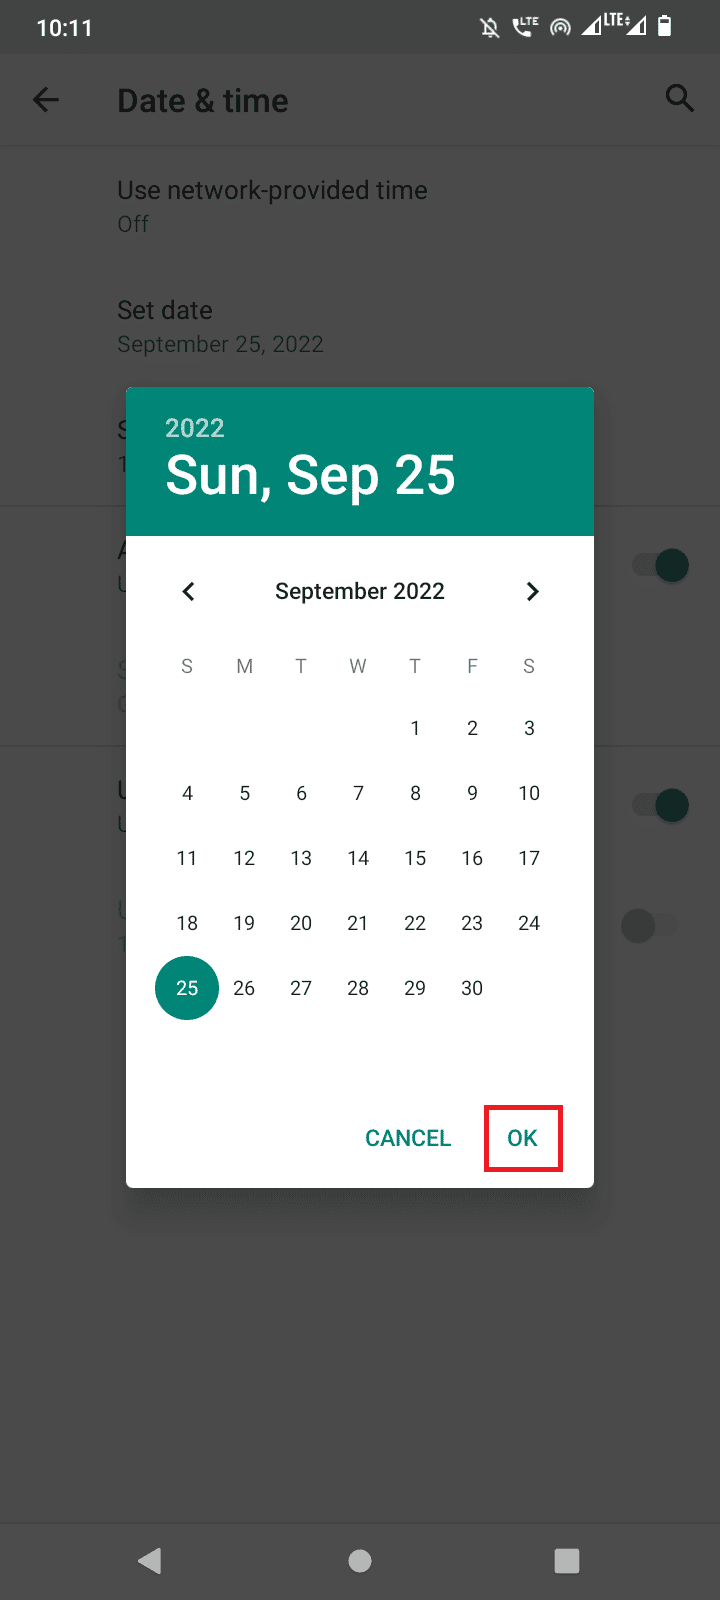 select correct date and tap OK